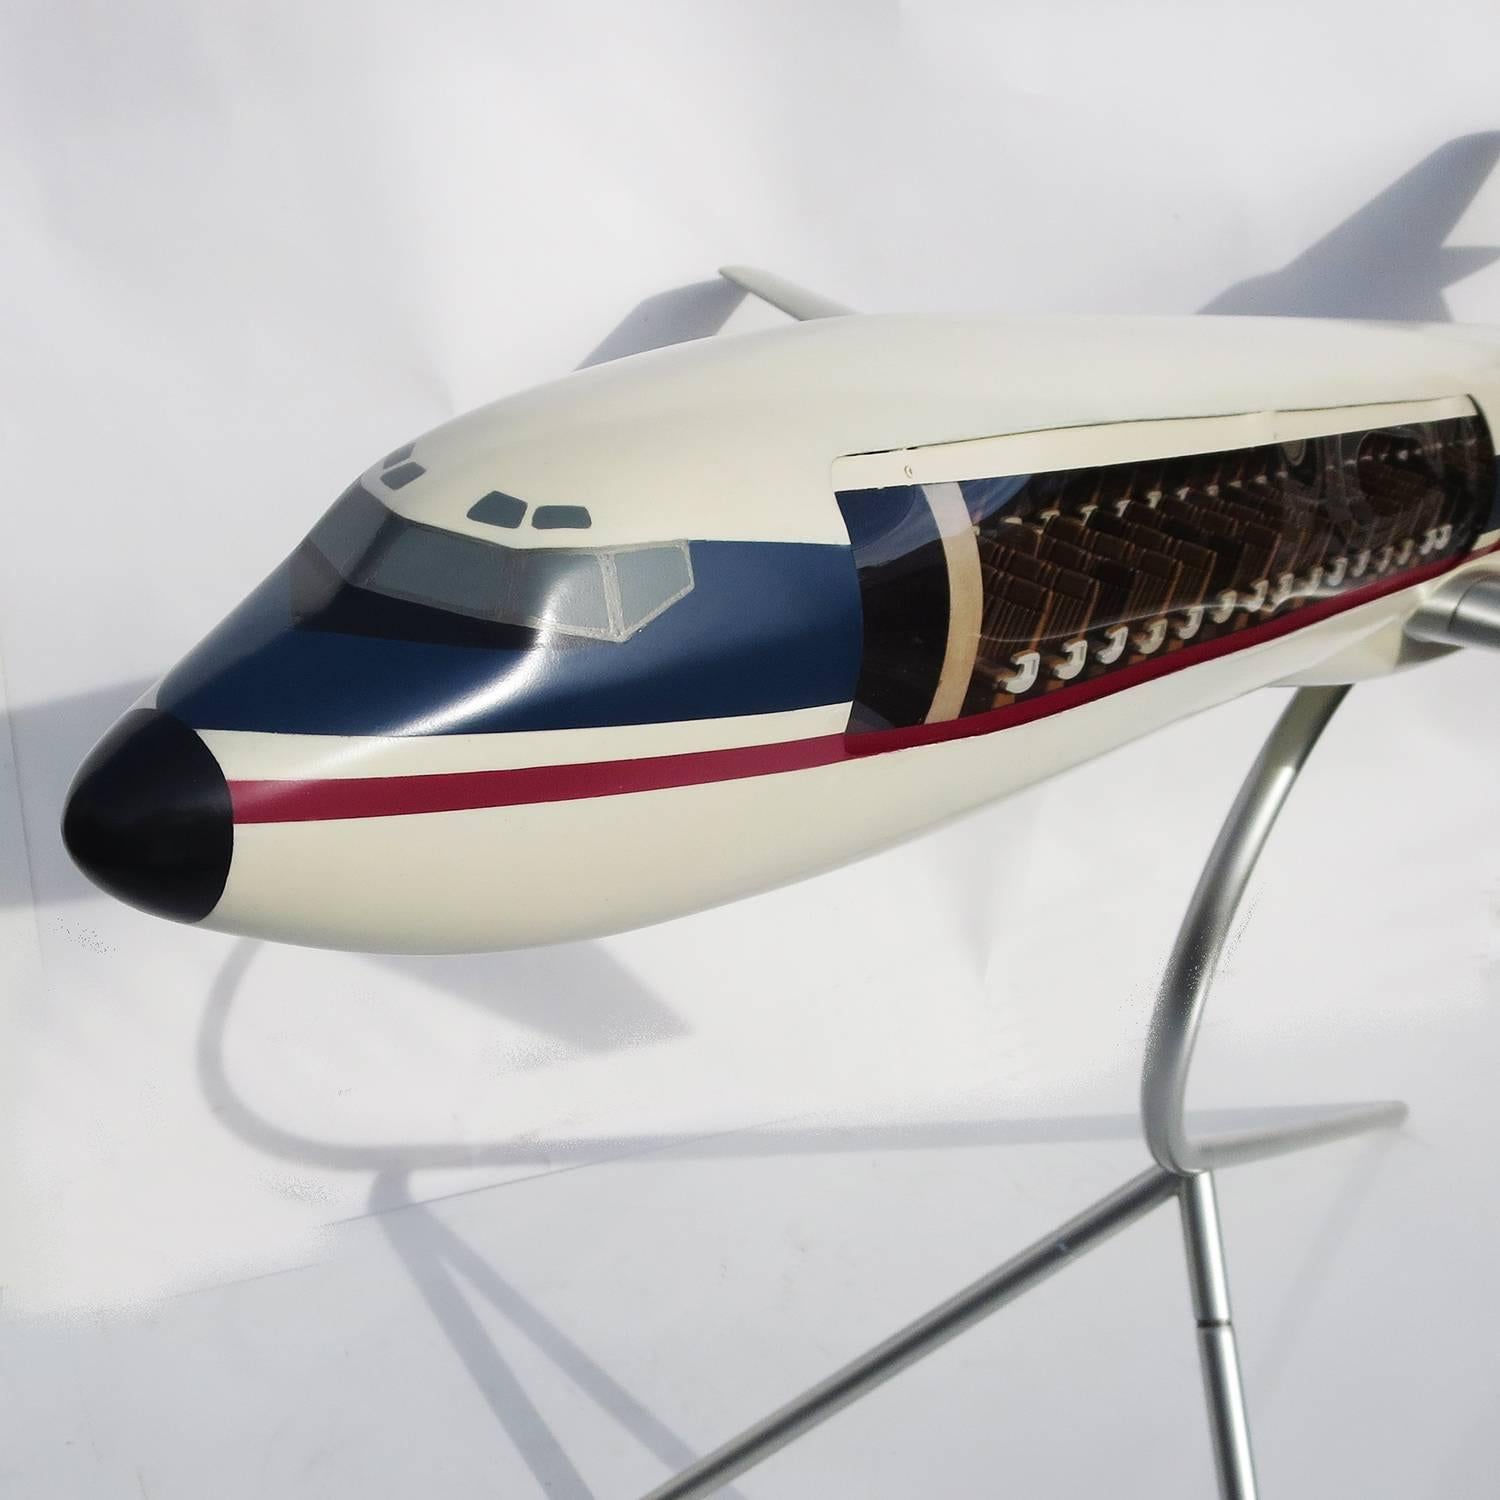 Founded in Venezuela in 1943, Avensa Airlines served the Latin market until its demise in 1997. Two remaining Boeing 727 jets were sold to Santa Barbara Air, and this model most likely made its' way to California at that time. The display model is a